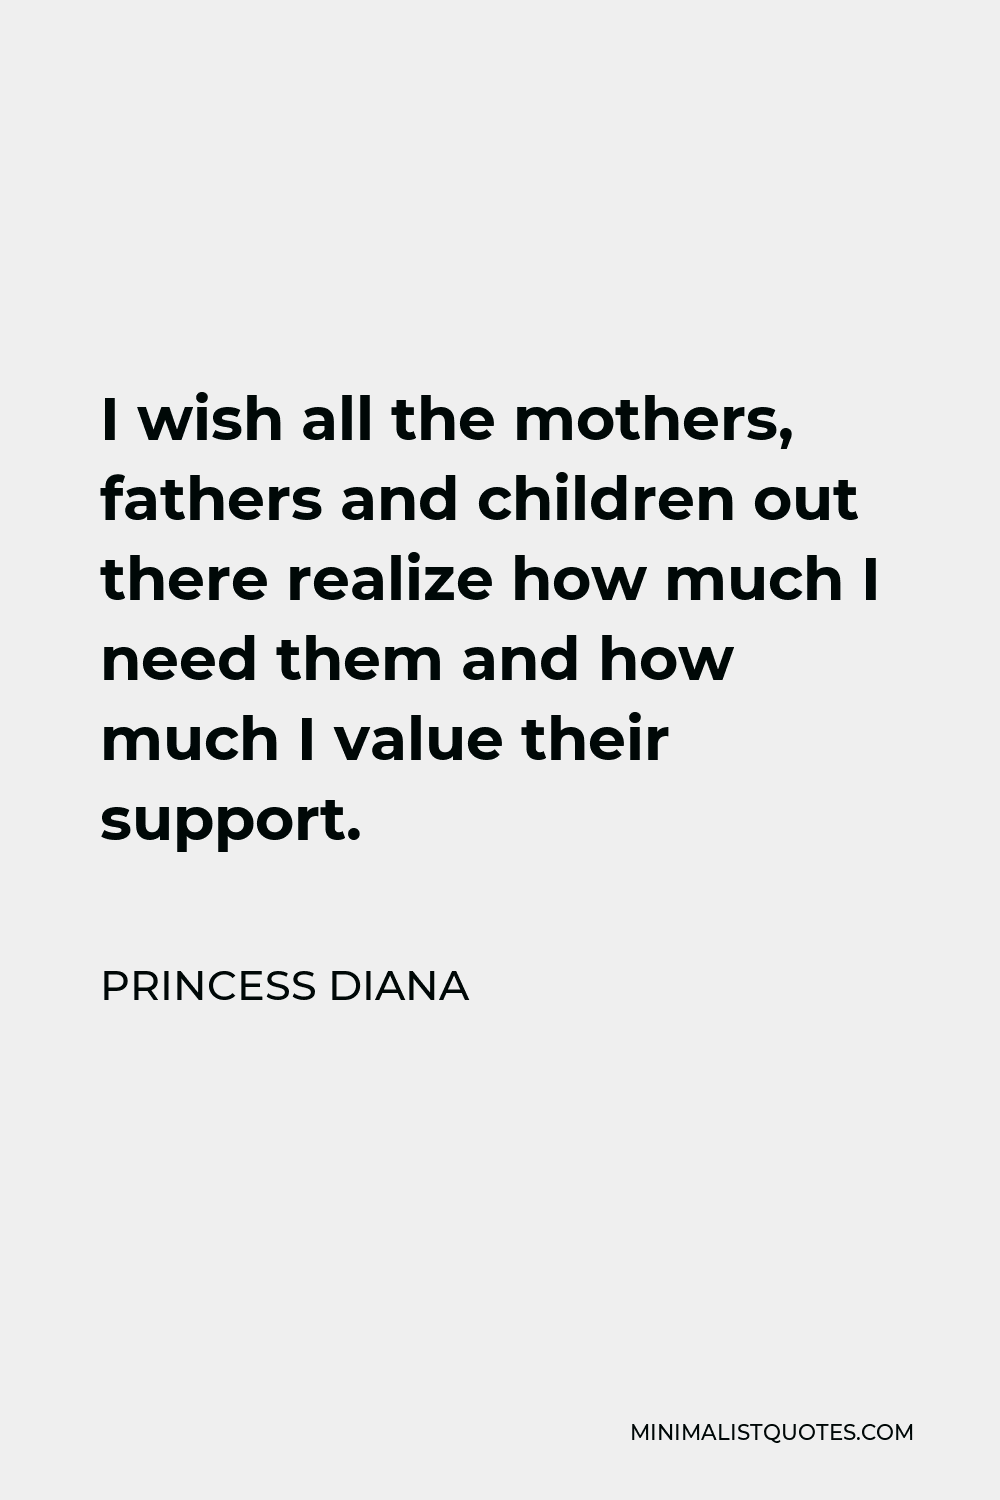 Princess Diana Quote - I wish all the mothers, fathers and children out there realize how much I need them and how much I value their support.